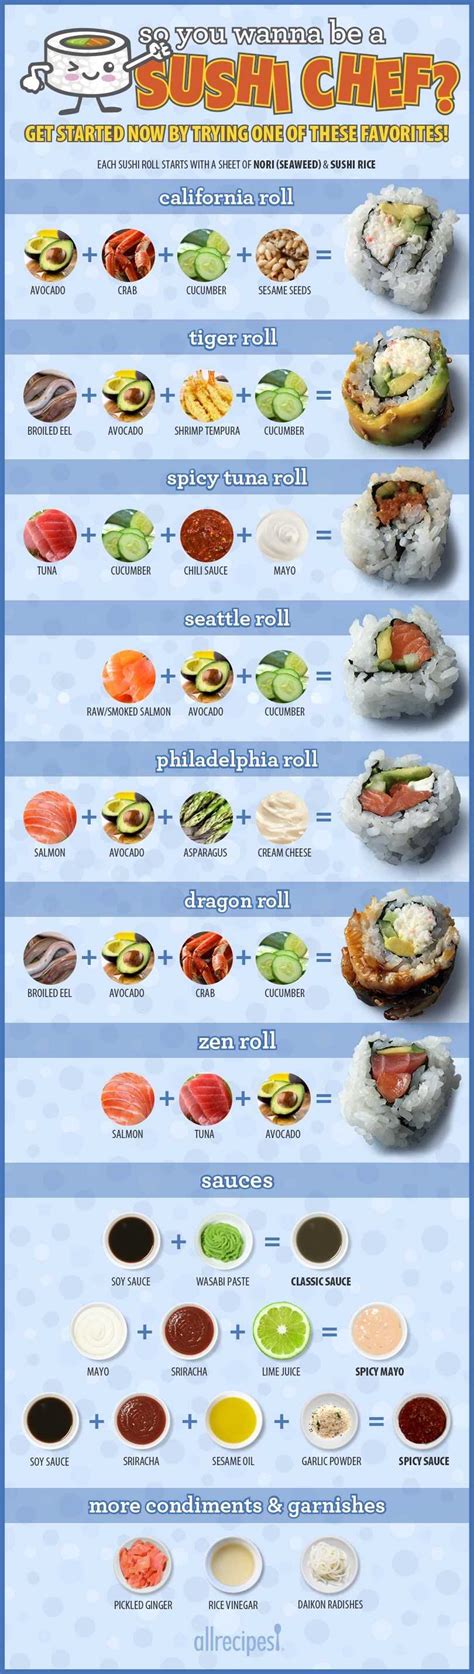 How to Make Your Own Sushi Rolls (Infographic) | Sushi recipes, Homemade sushi, Sushi recipes ...